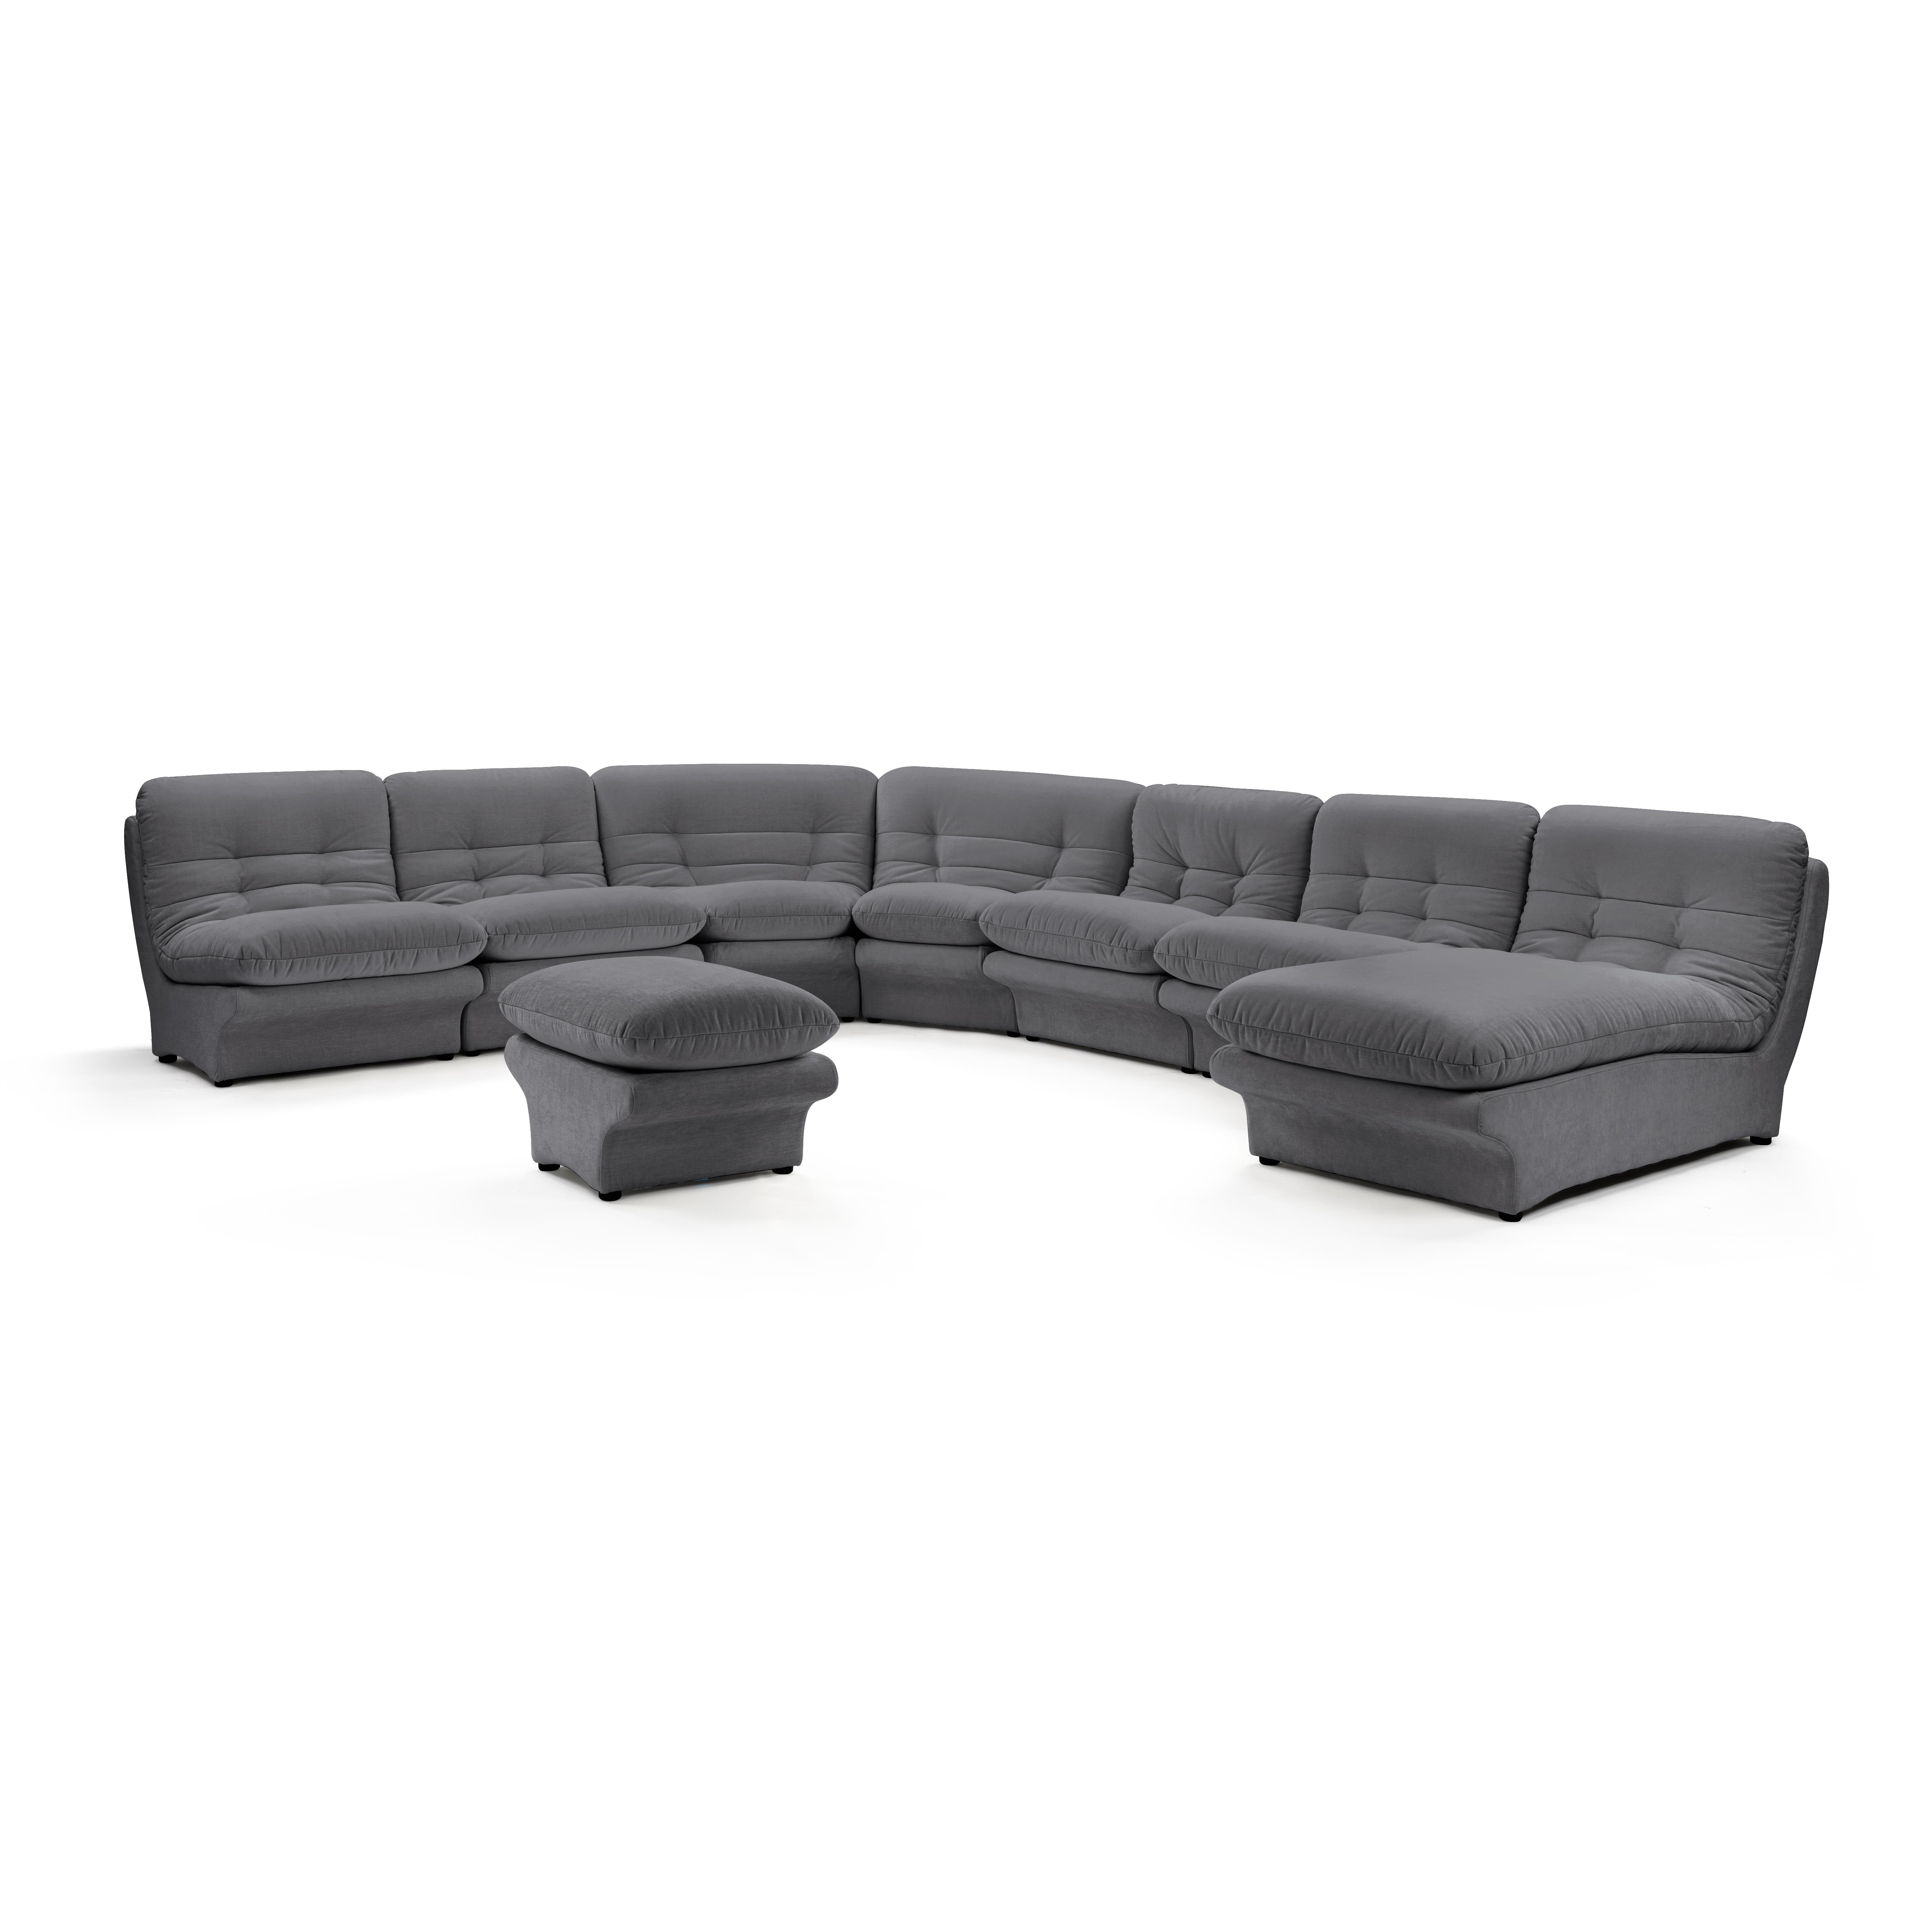 Carsons Mid Century Curved Modular Sectional Sofa / Combination 001 Performance Felt-Ink